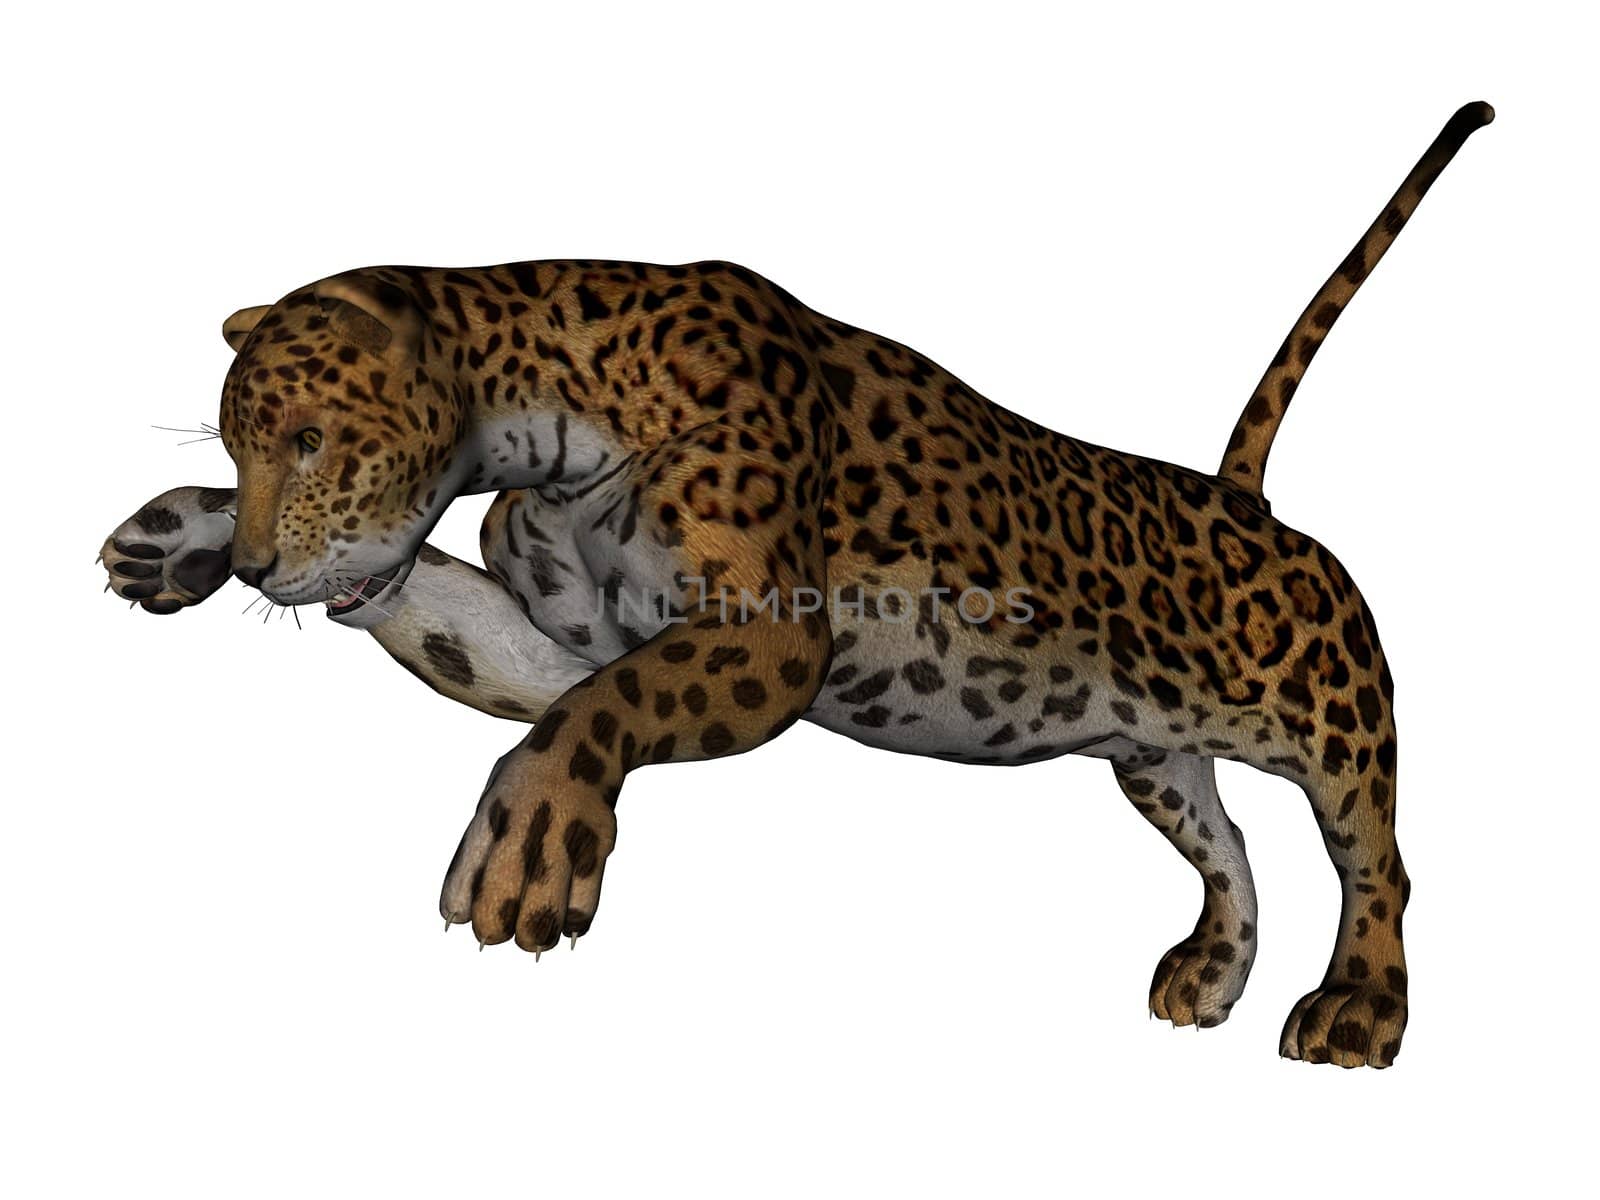 3D rendered jaguar on white background isolated